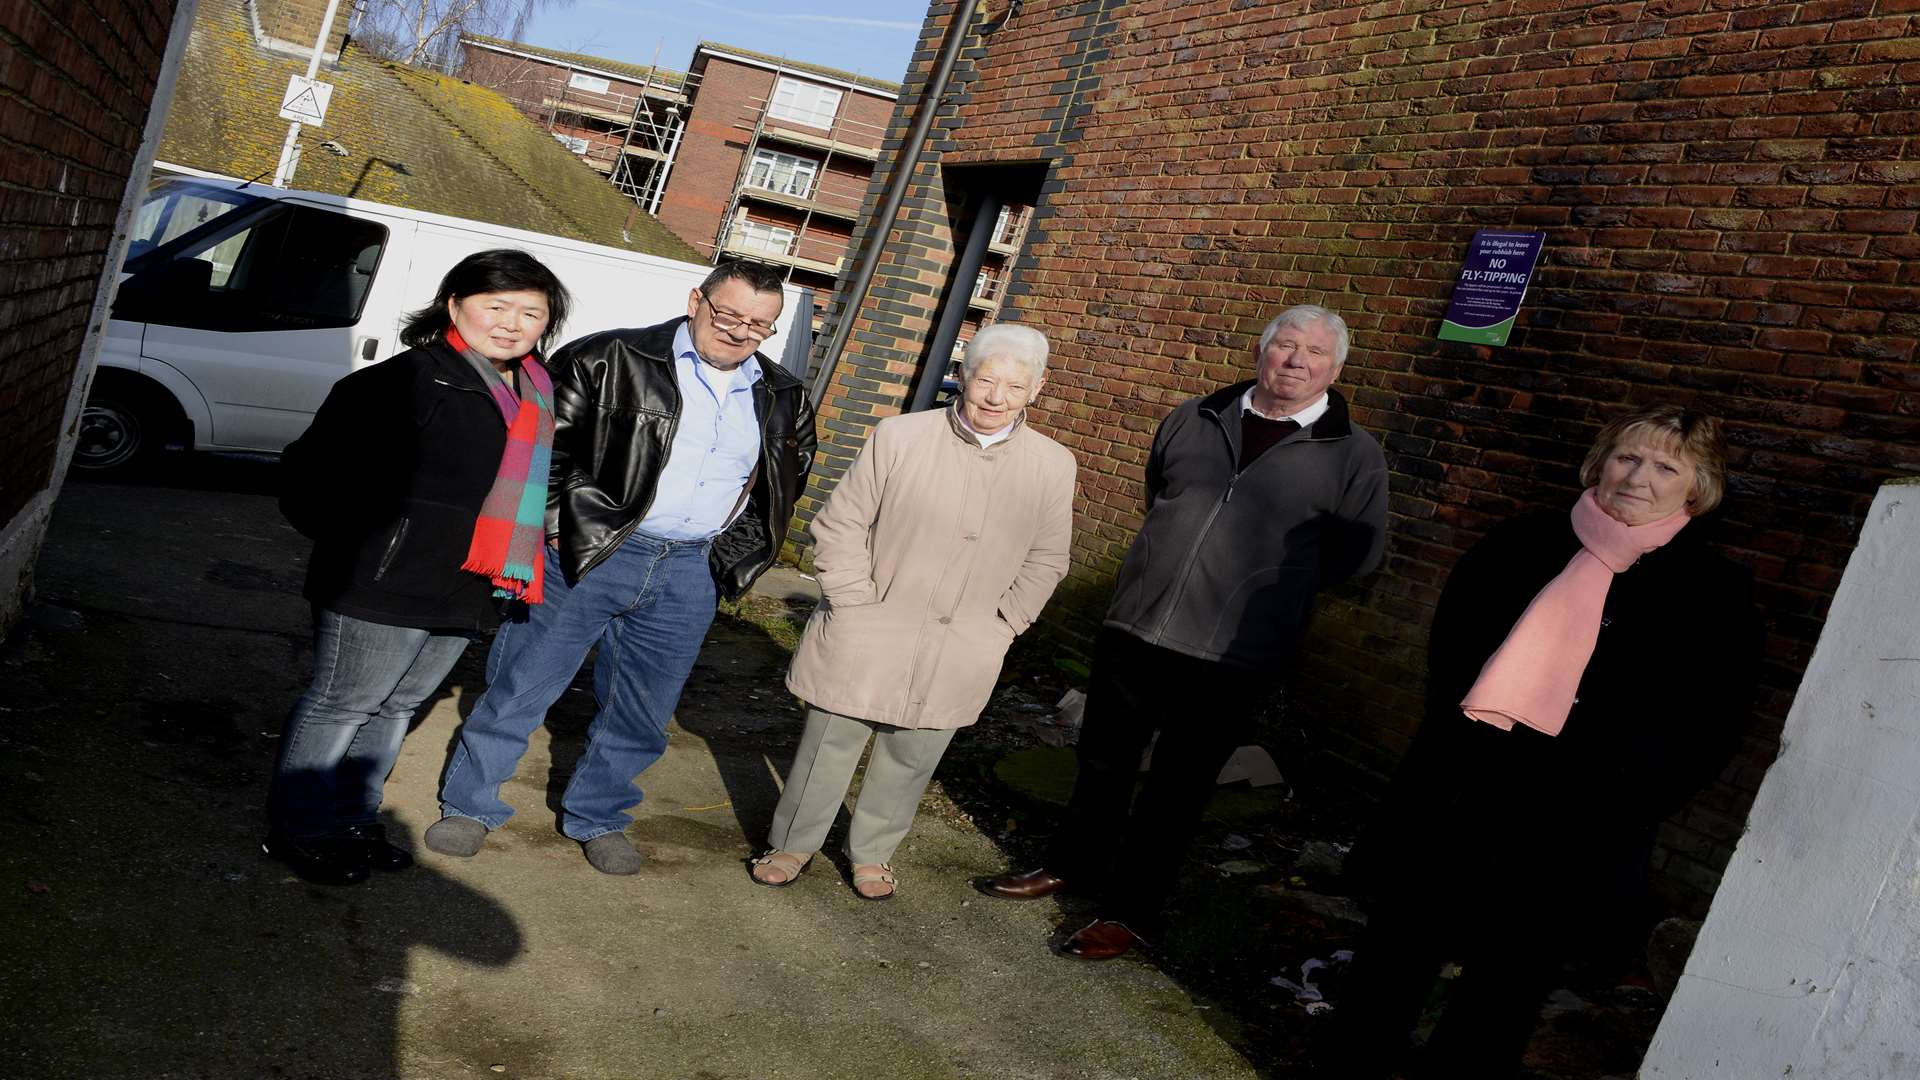 Cllr Mary Lawes with residents Alan and Joyce Carolan, Ruby Bower and John Riccoboni in the alley where rubbish is dumped.Picture: Paul Amos